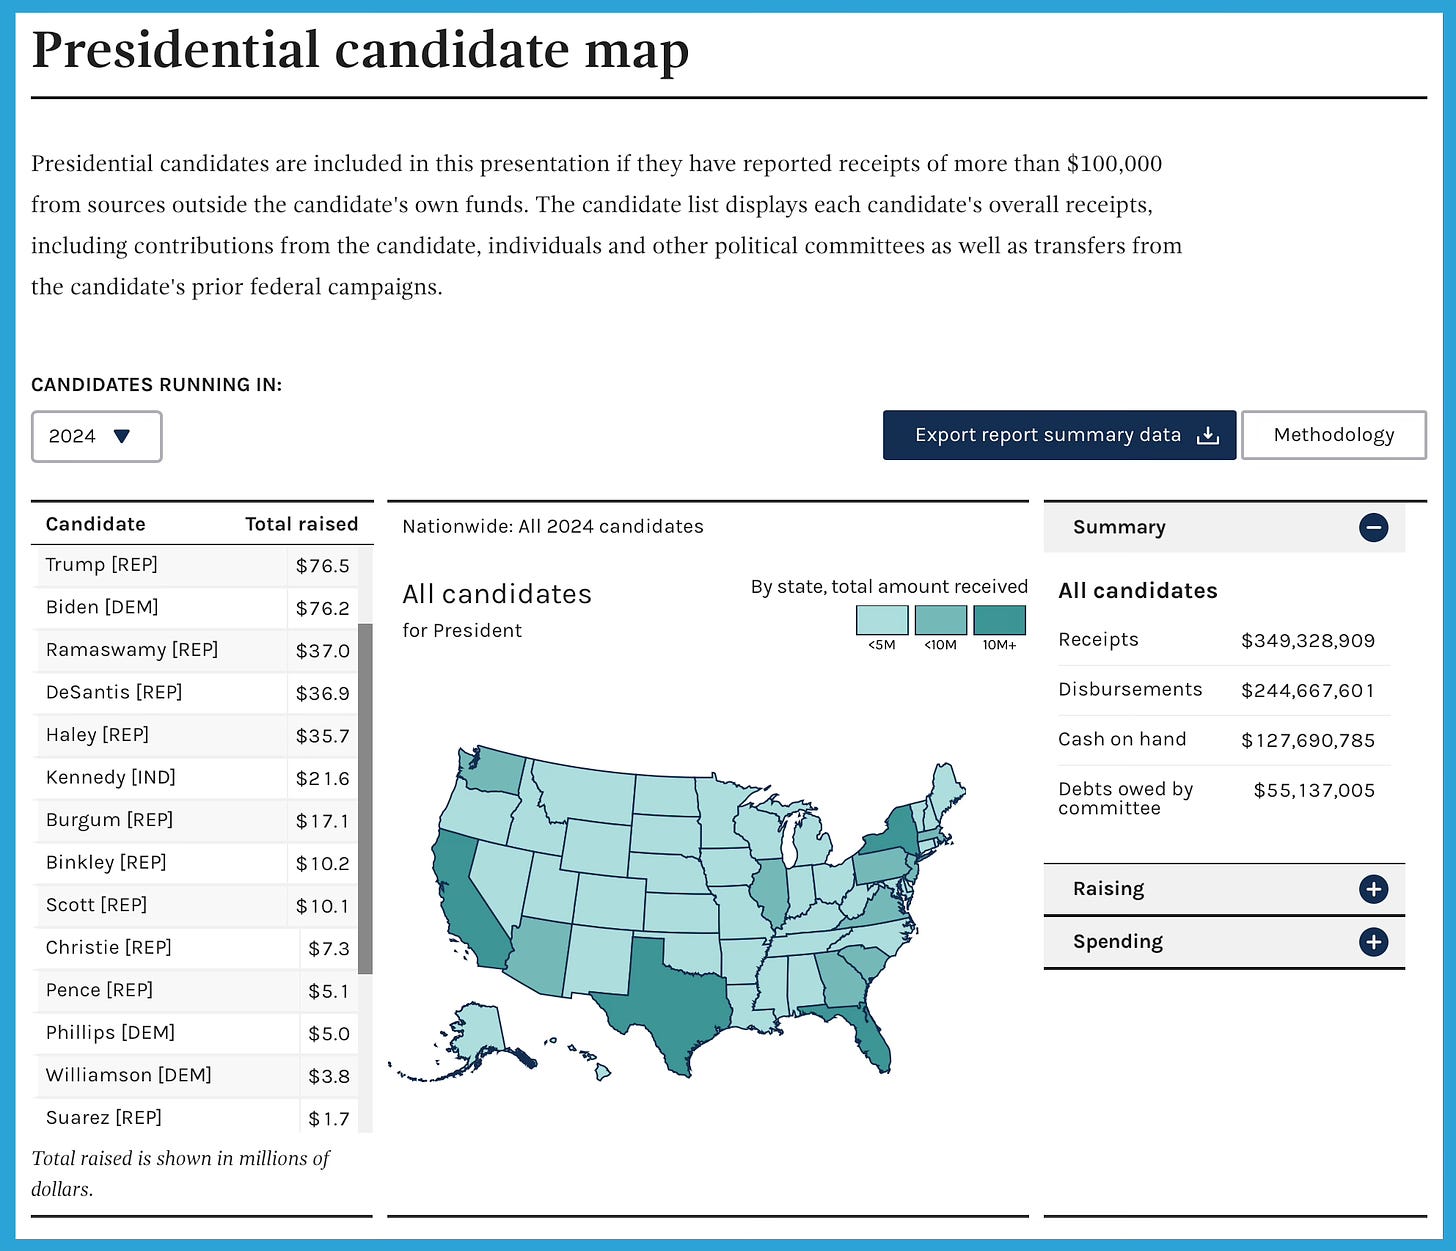 This data summarizes financial information disclosed by presidential candidates who have reported at least $100,000 in contributions from individuals other than the candidate.  The 2024 files contain financial activity through the most recent filing. The historical files contain financial activity through December 31 of the corresponding election year.